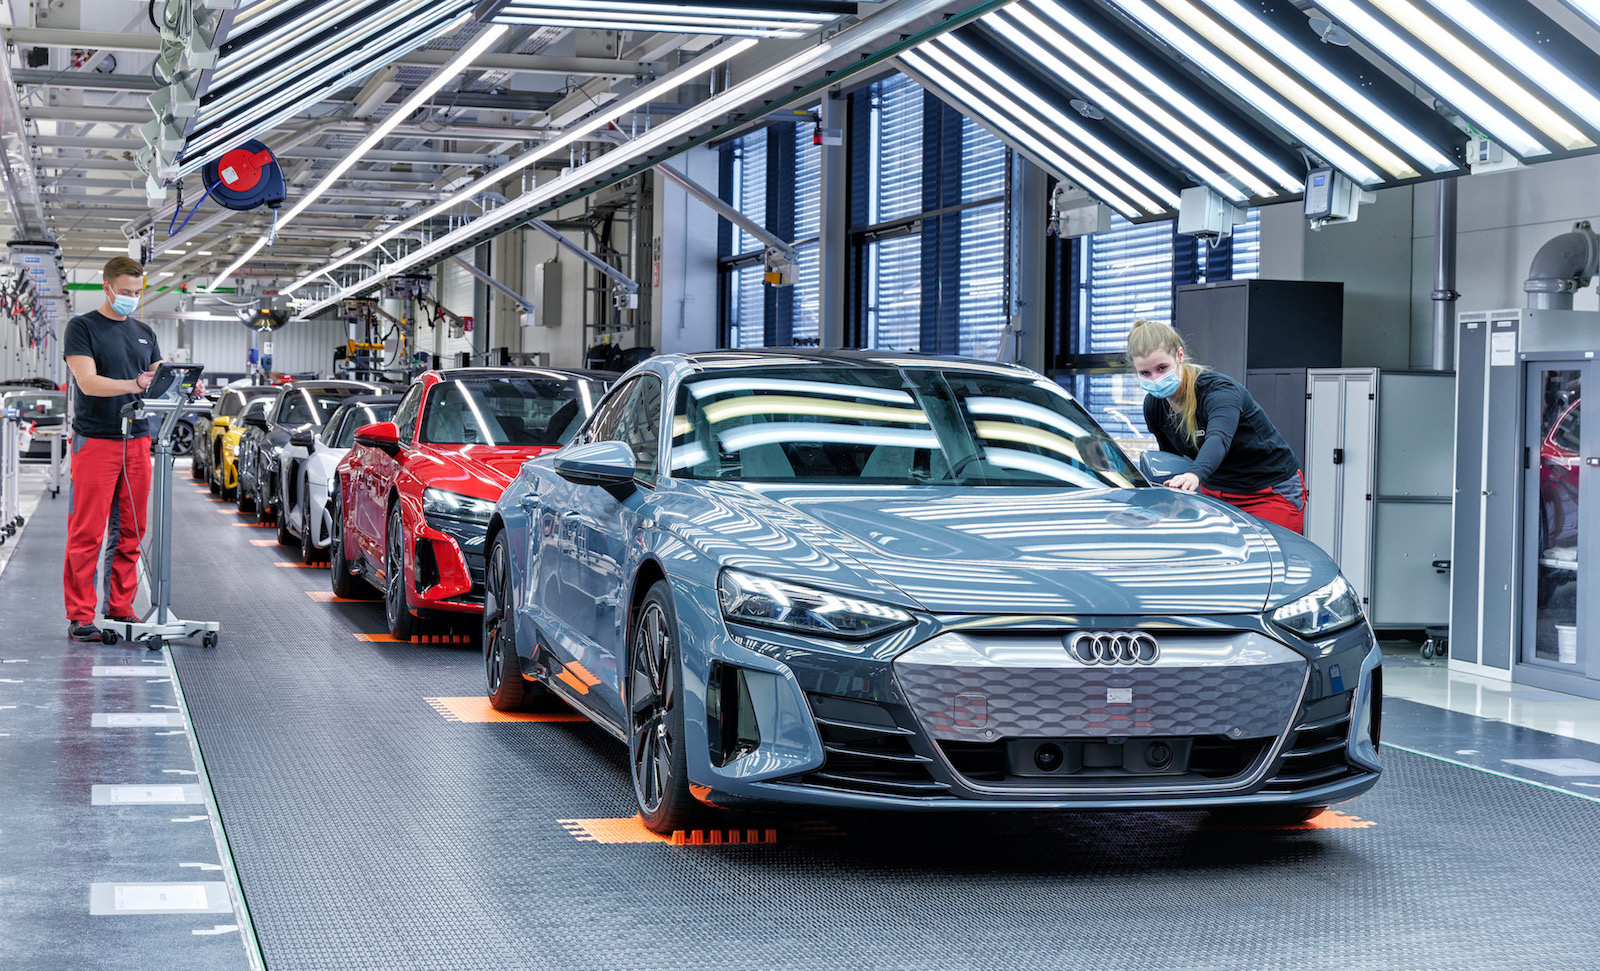 Audi reports 1.7 million global sales in 2020, down 8.0%